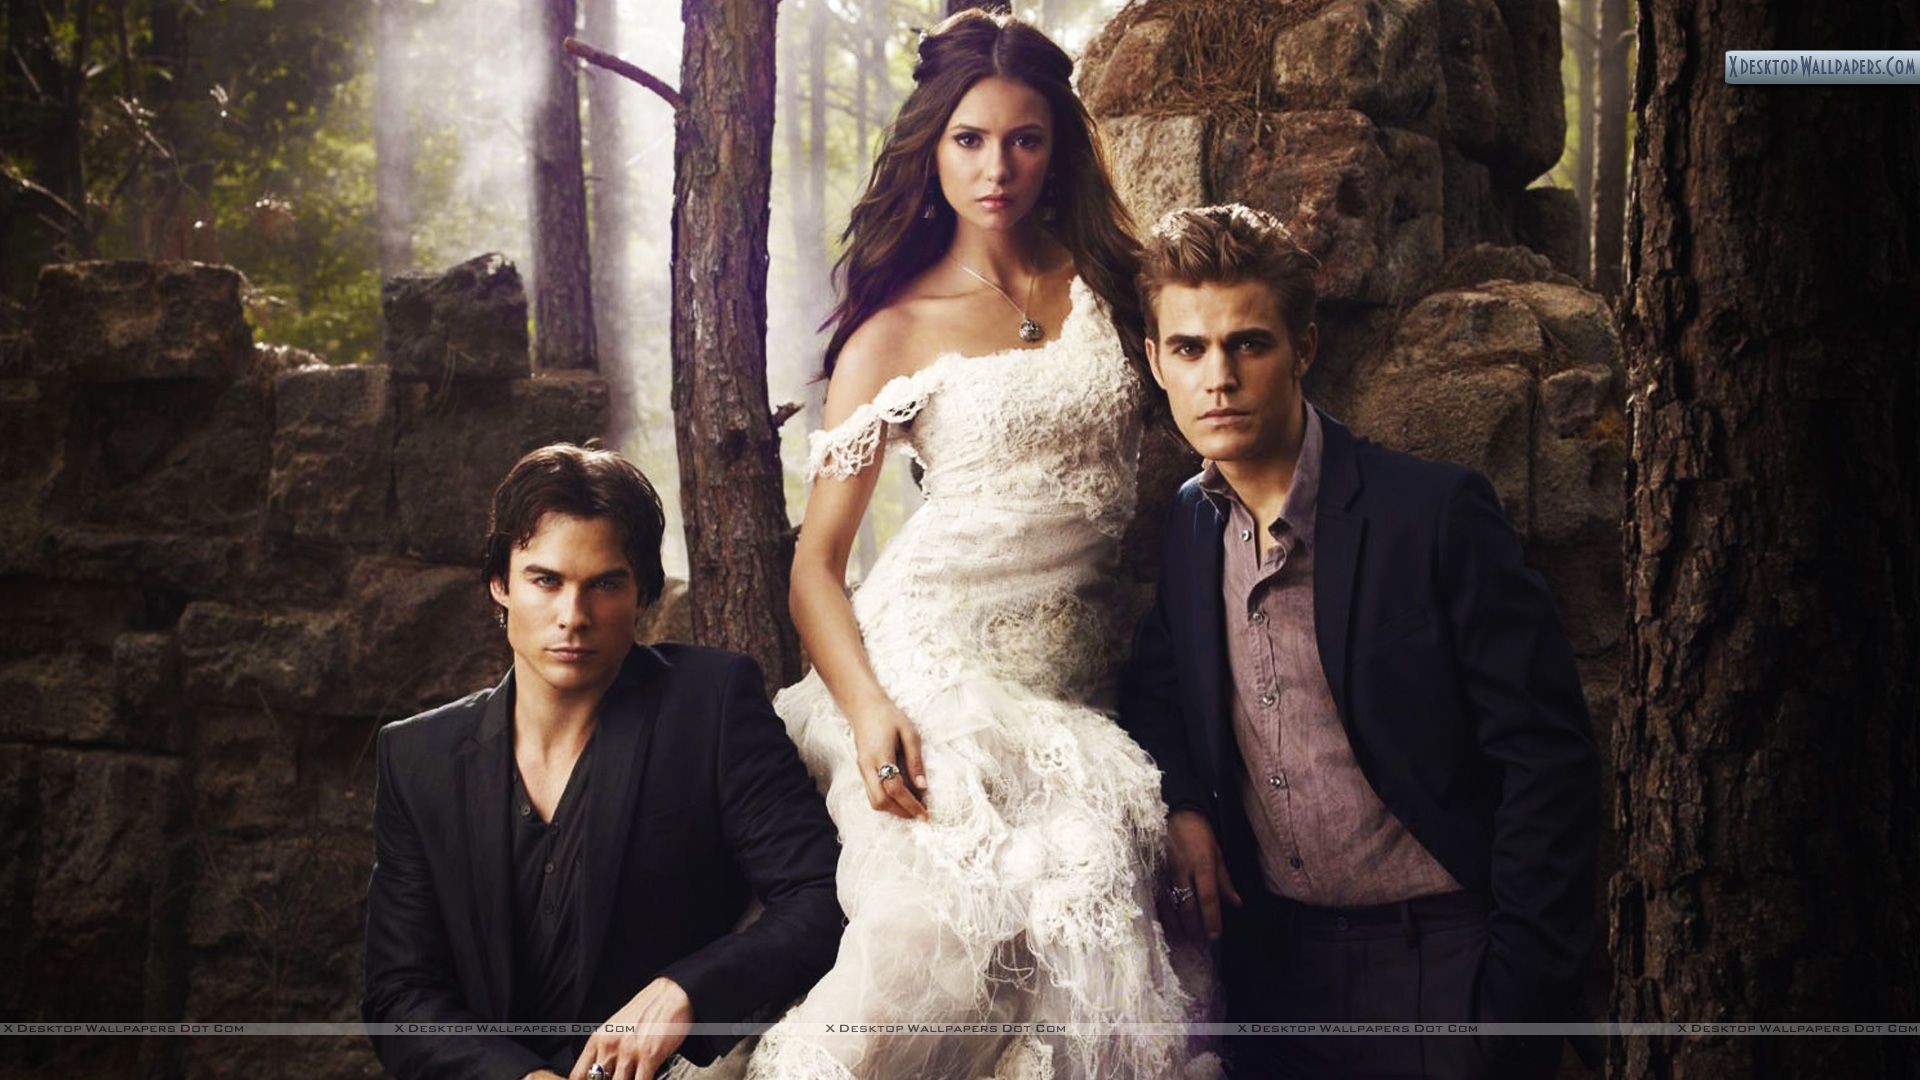 The Vampire Diaries Hd Wallpapers 1920x1080